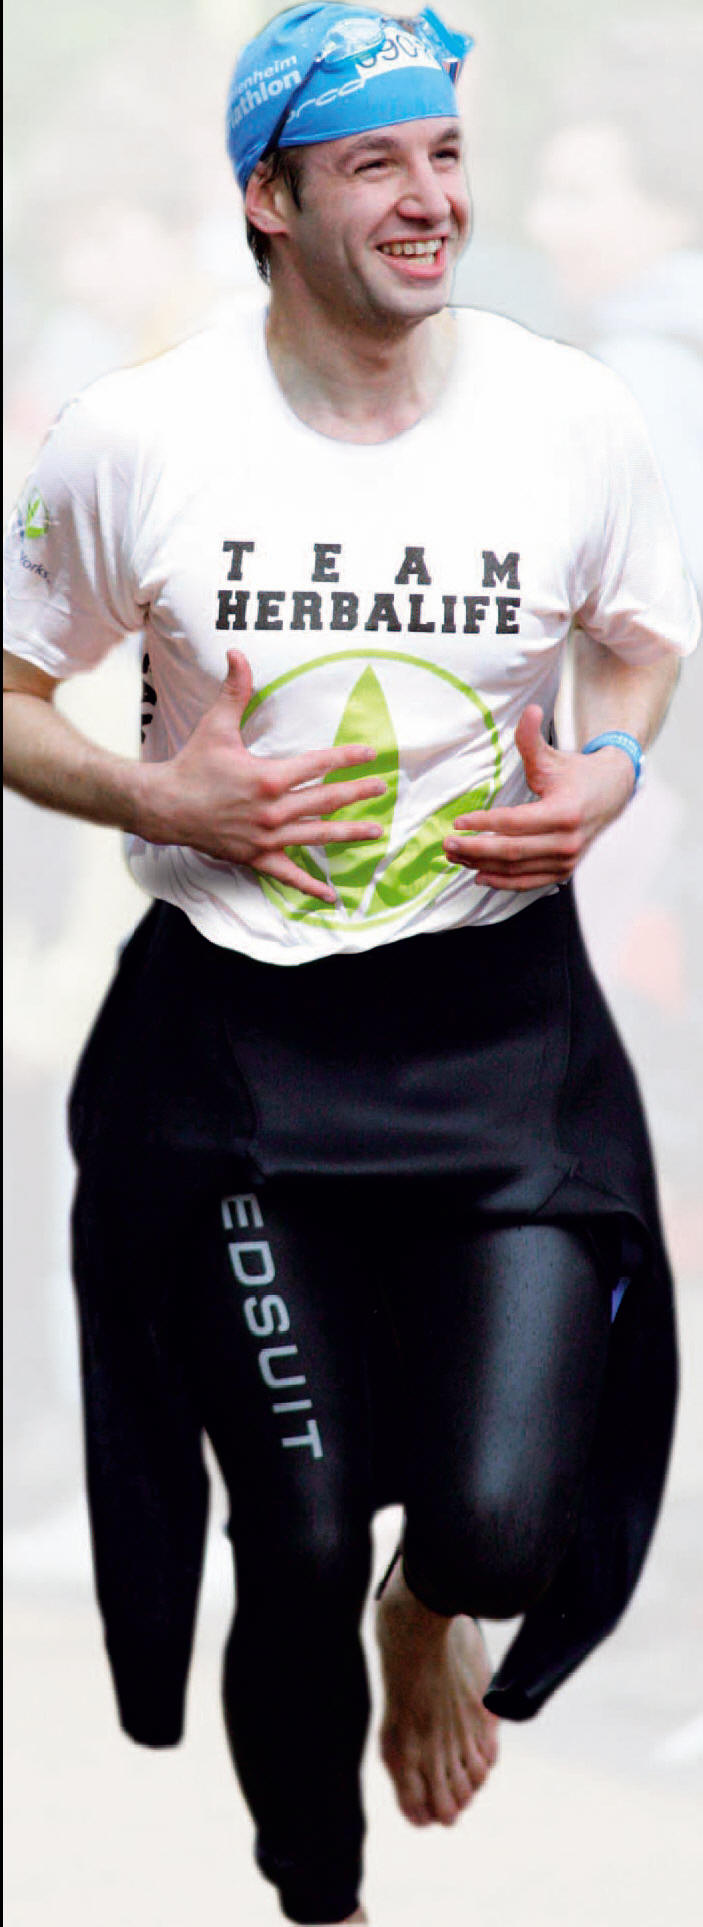 HERBALIFE PRODUCTS